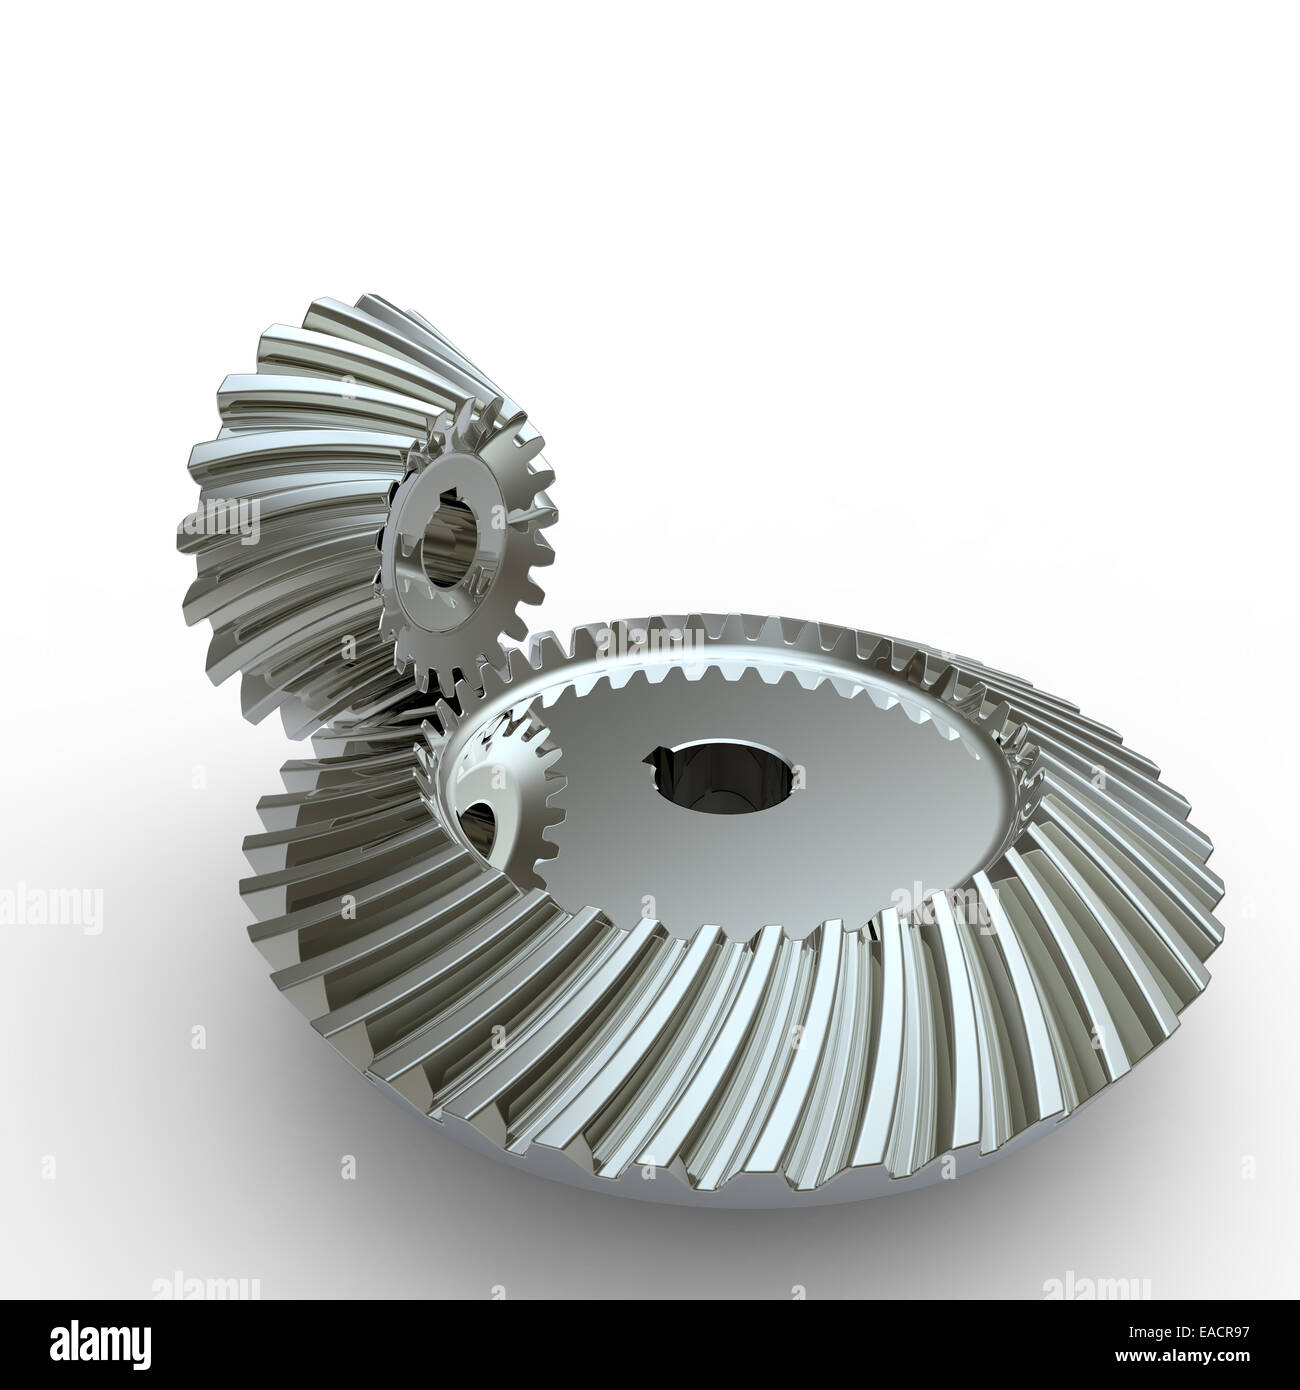 crown and pinion spiral bevel gears on a white background Stock Photo